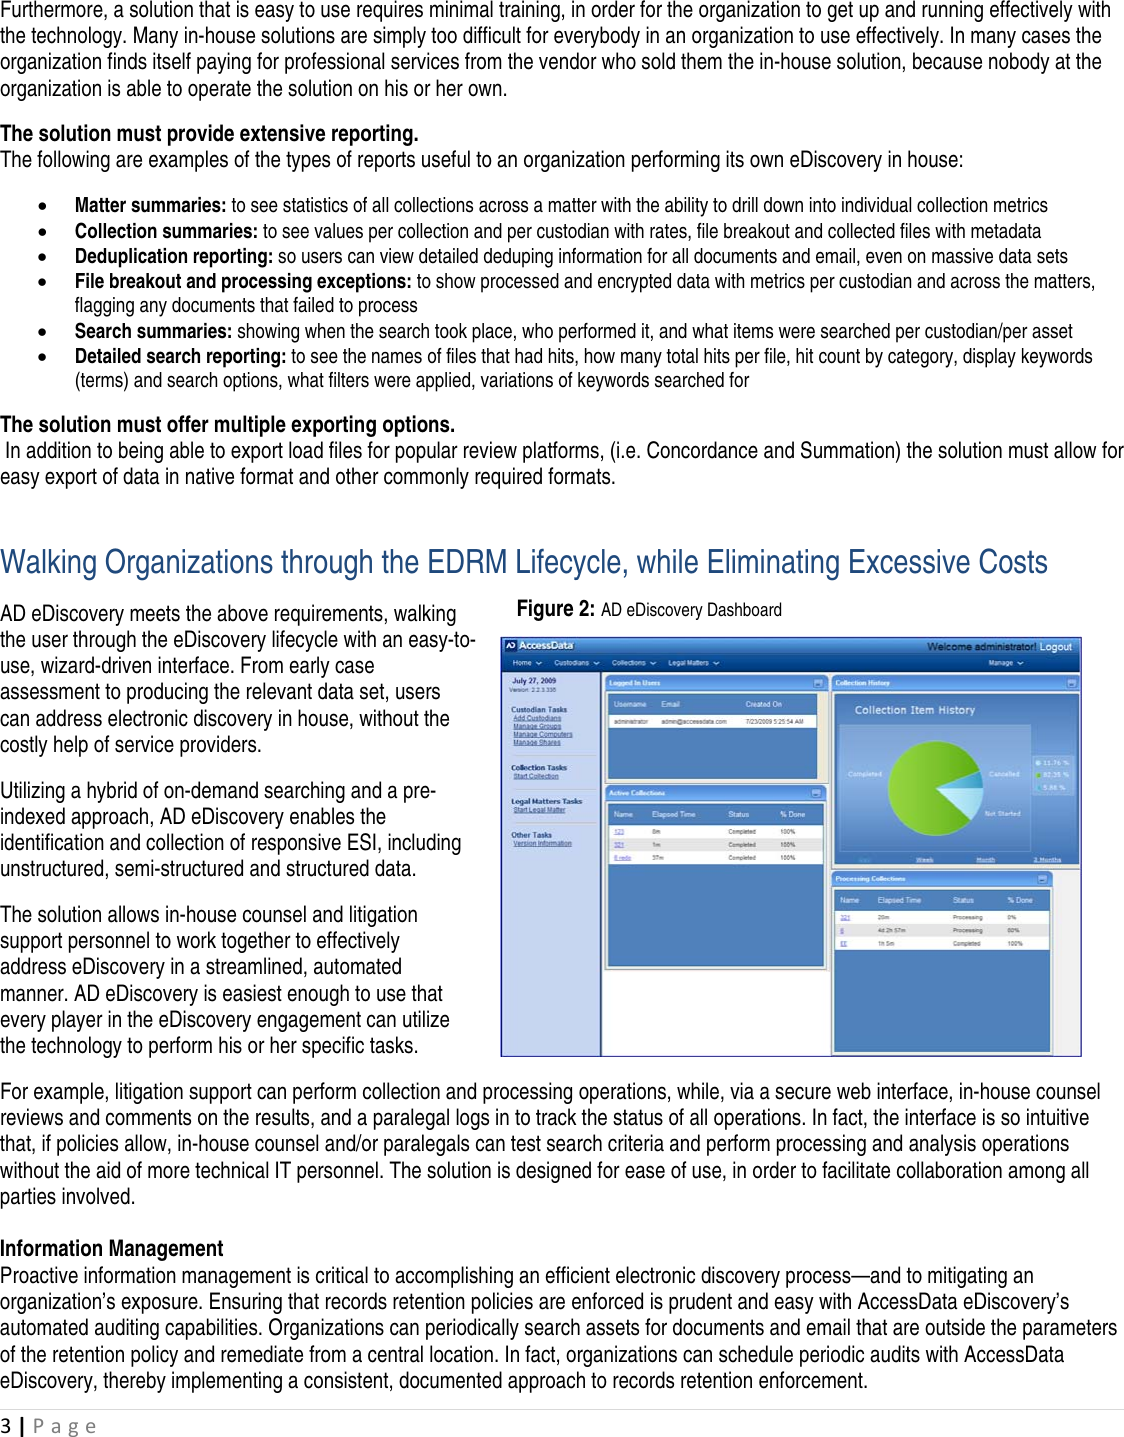 Page 5 of 12 - Guide To AccessData EDiscovery_MapsEDRM_3-4-10[1]  AD E Discovery Implementing In-House Solution Maps EDRM